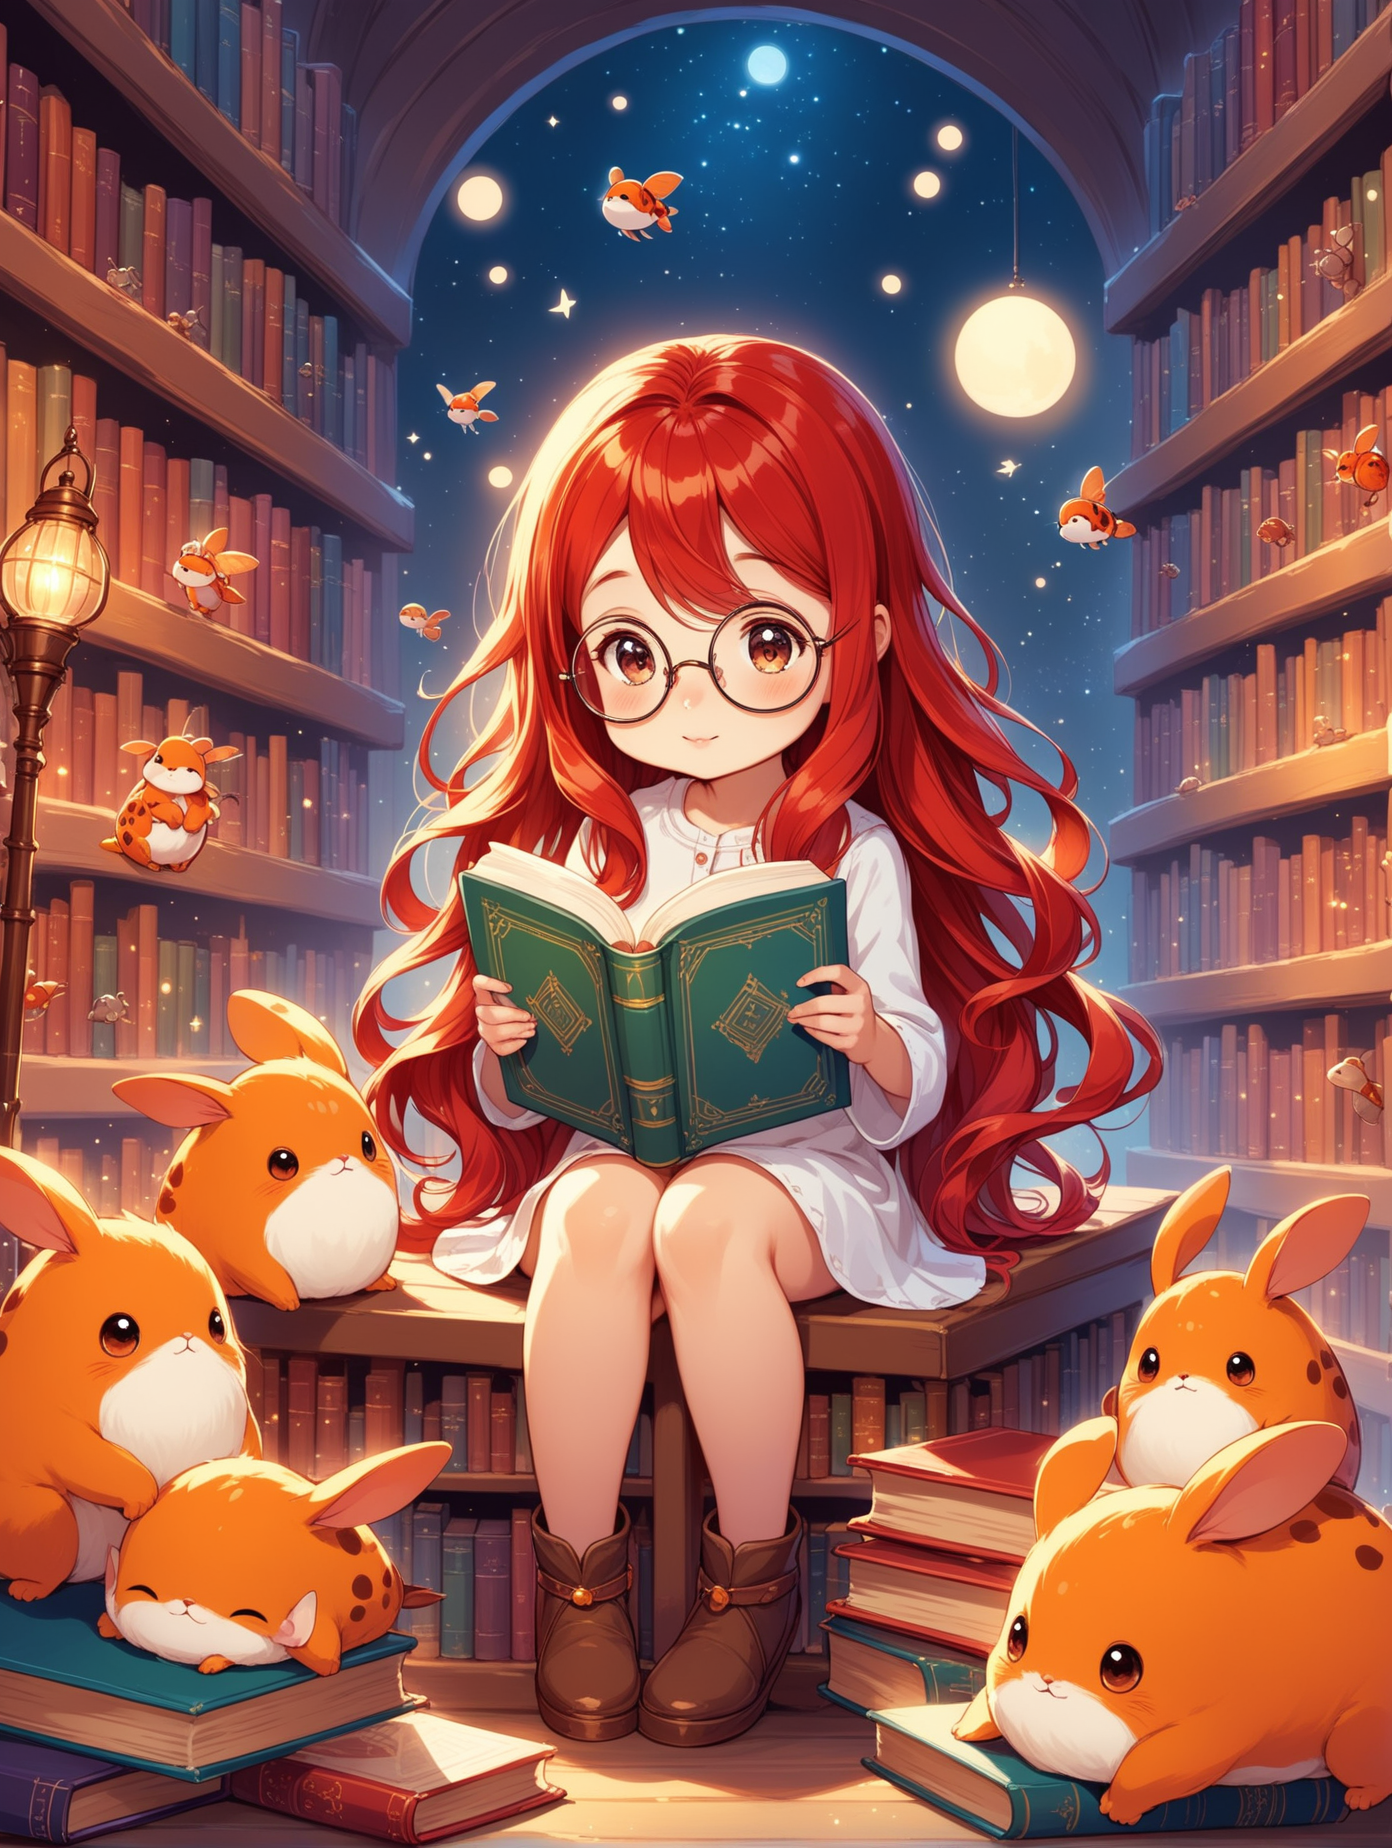 Adorable Cartoon Girl with Red Curly Hair Reading Surrounded by Fantasy Creatures in Library